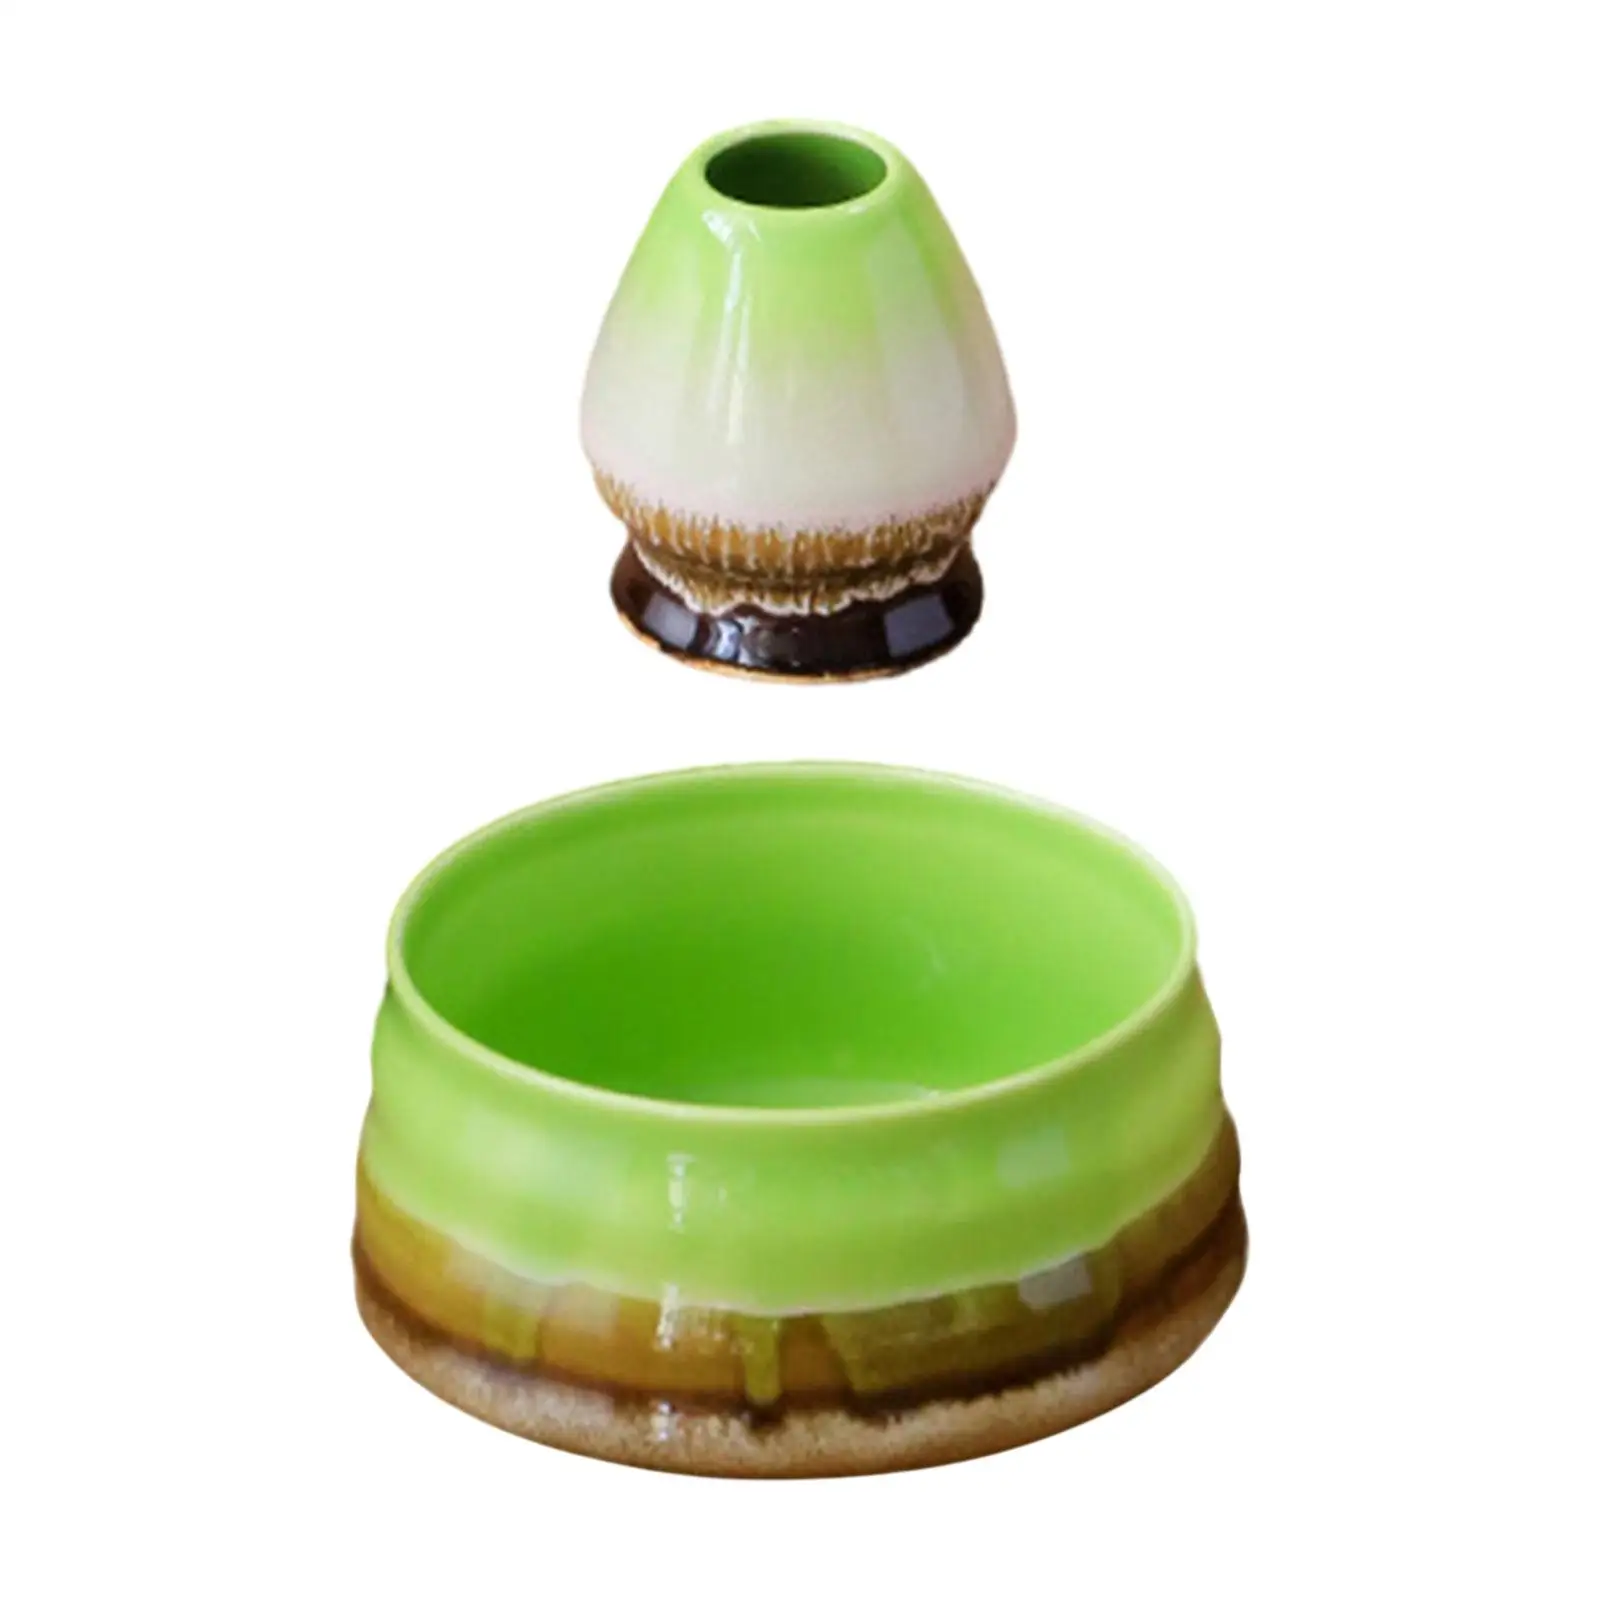 2 Pieces Salad Porridge Bowl Cup and Chasen Rest Matcha Ceramic Bowl for Tea Lovers Friends Beginner Japanese Matcha Preparation